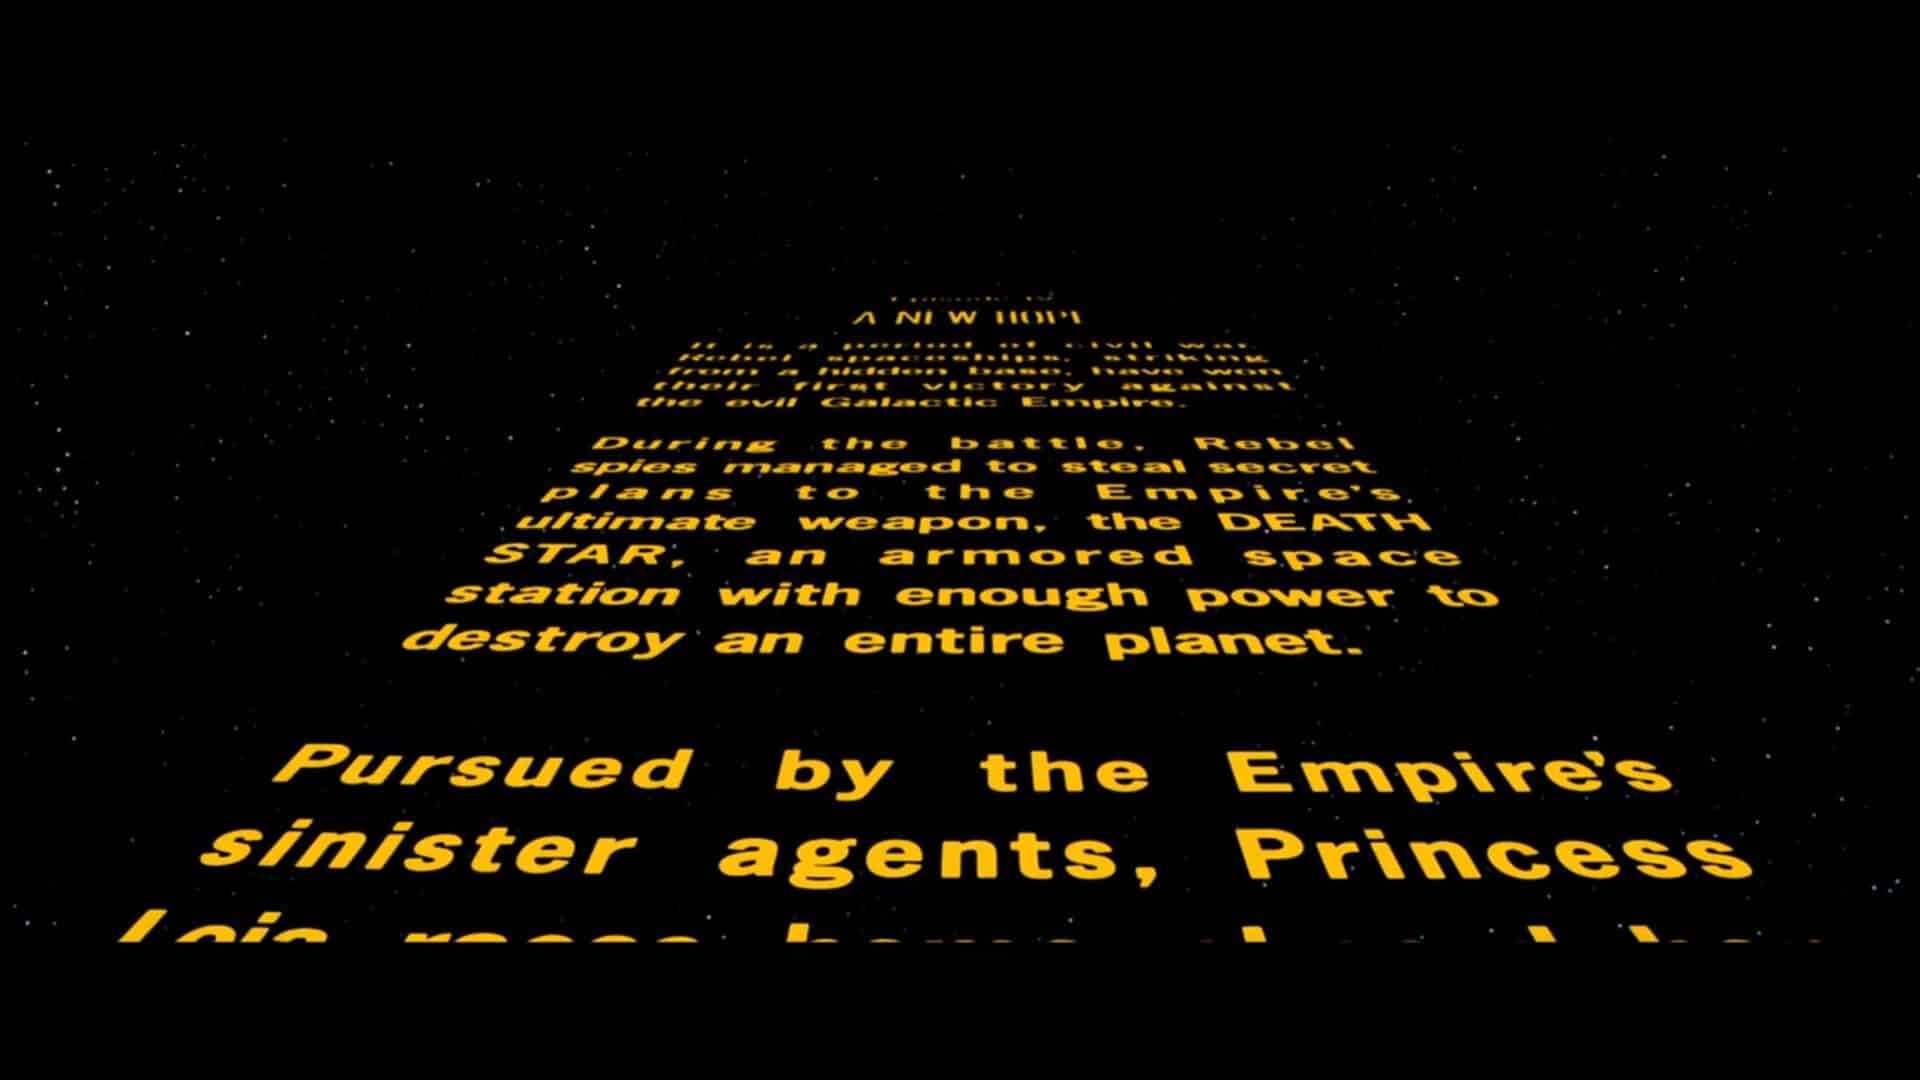 Star Wars opening crawl with four dots - Four-Dot Ellipsis